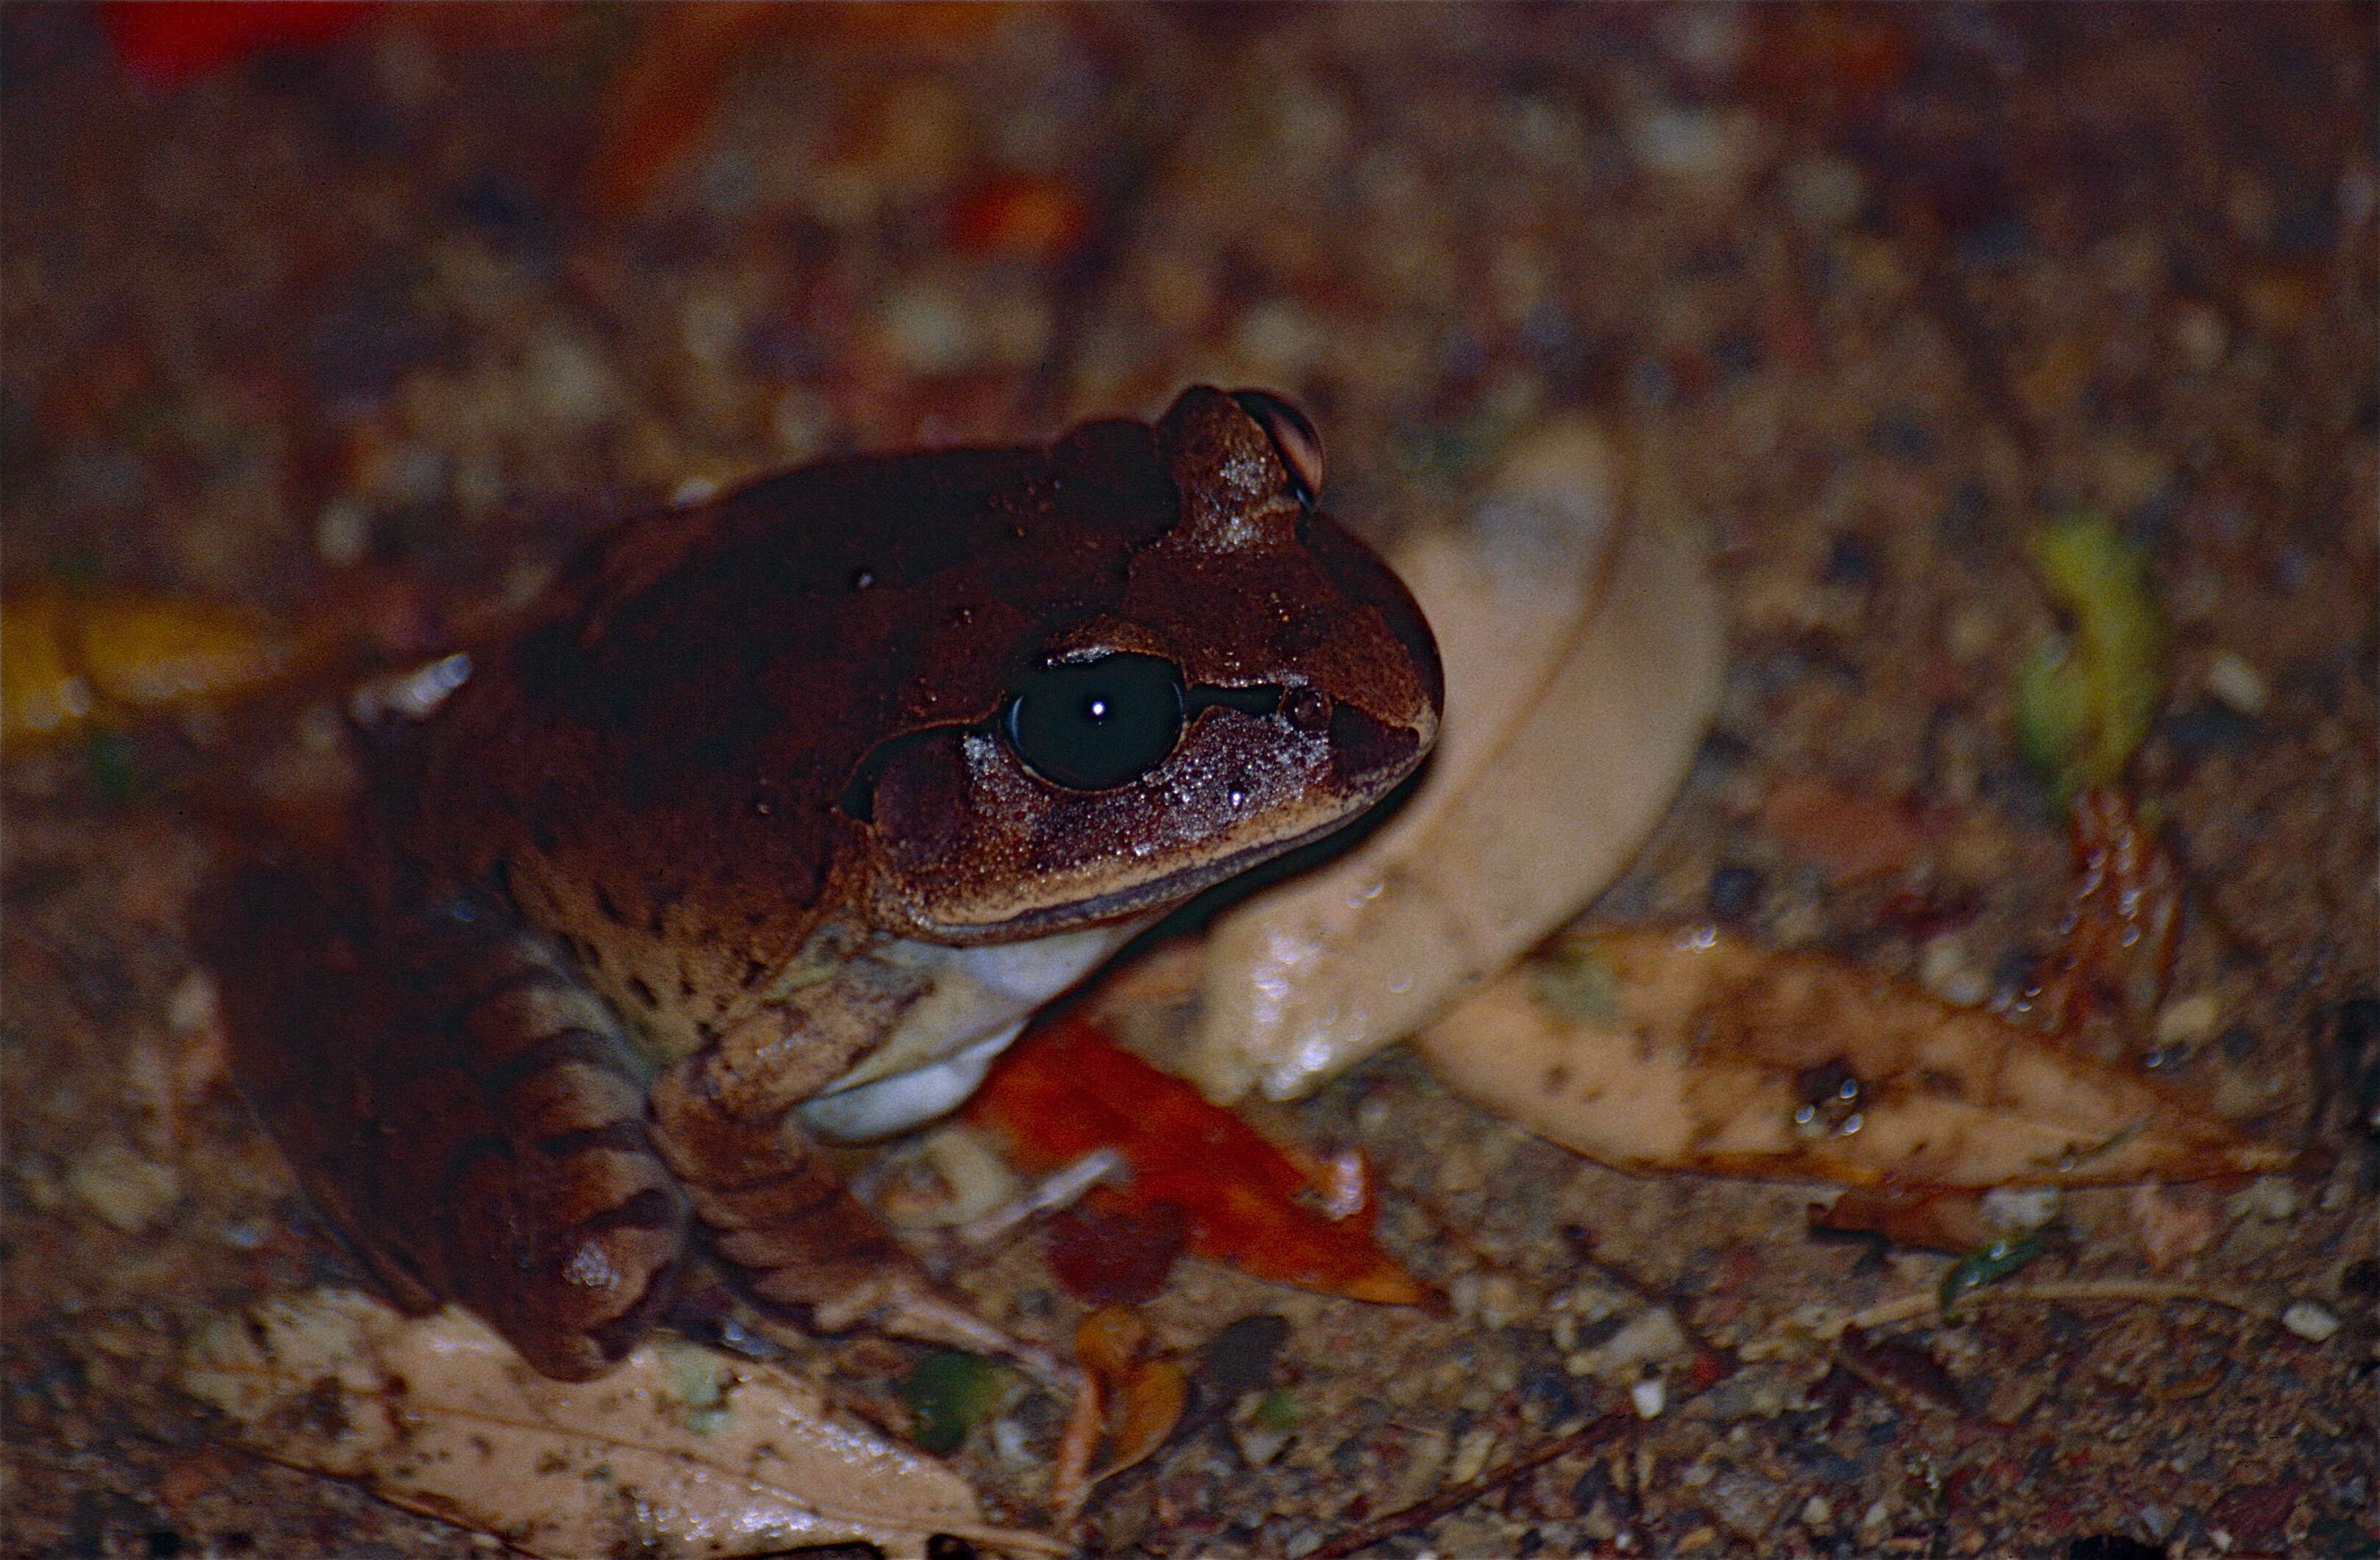 Image of frogs and toads